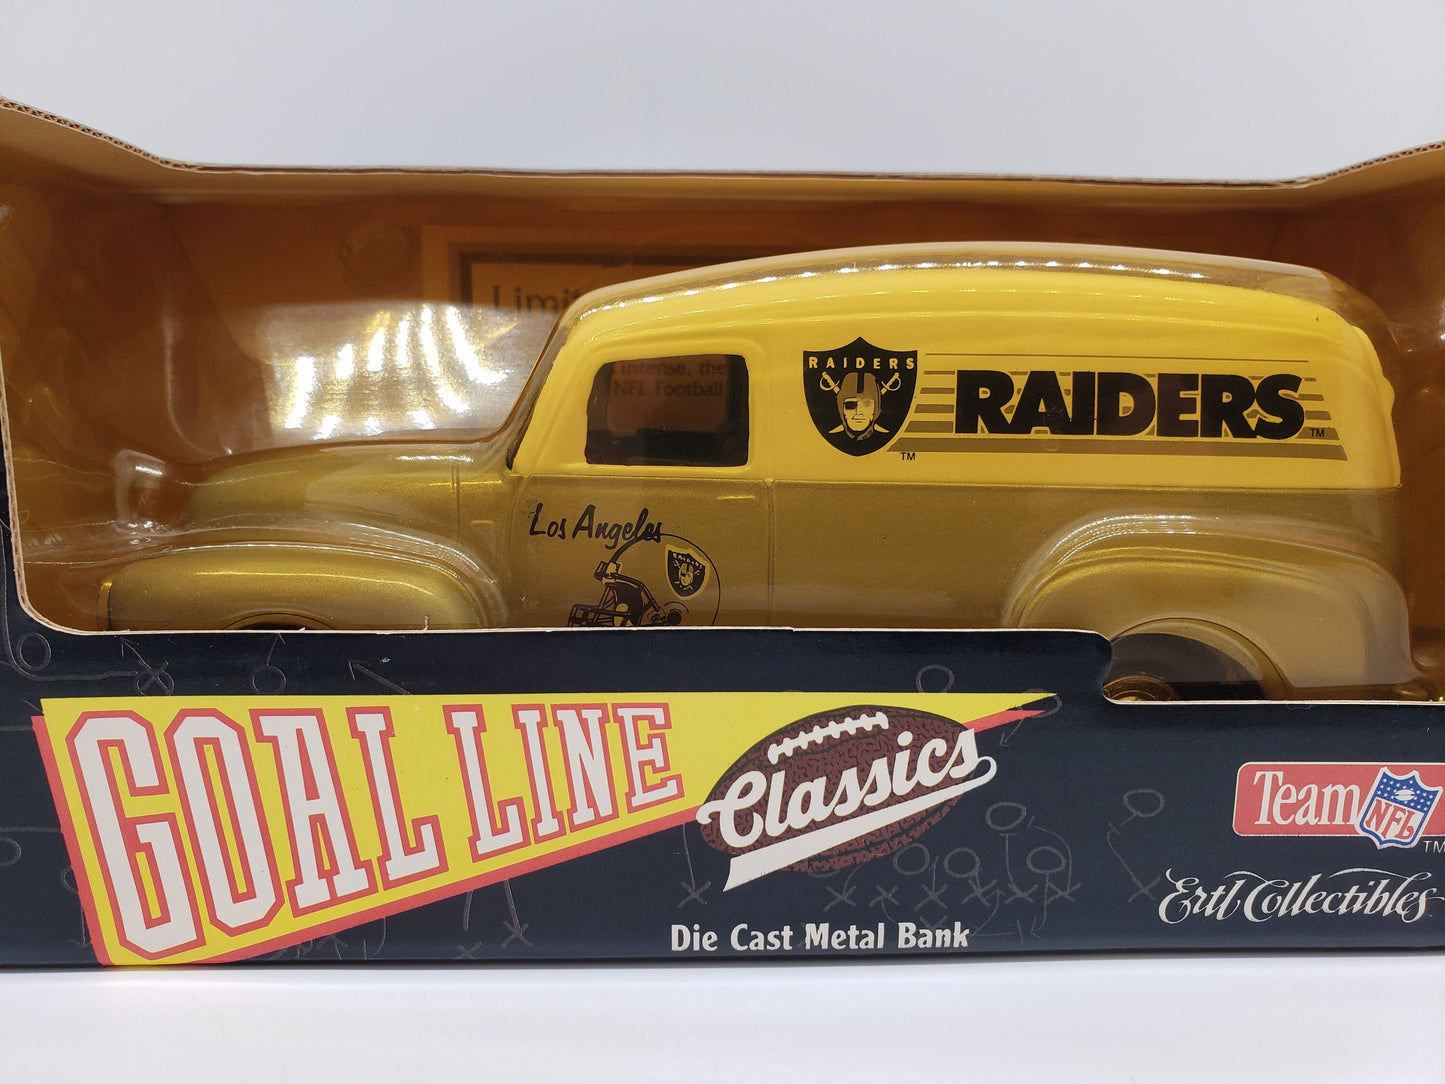 Ertl Collectibles Los Angeles Raiders GMC Truck Silver Rare Collectable Scale Model Toy Car Die Cast Metal Bank Perfect Birthday Gift